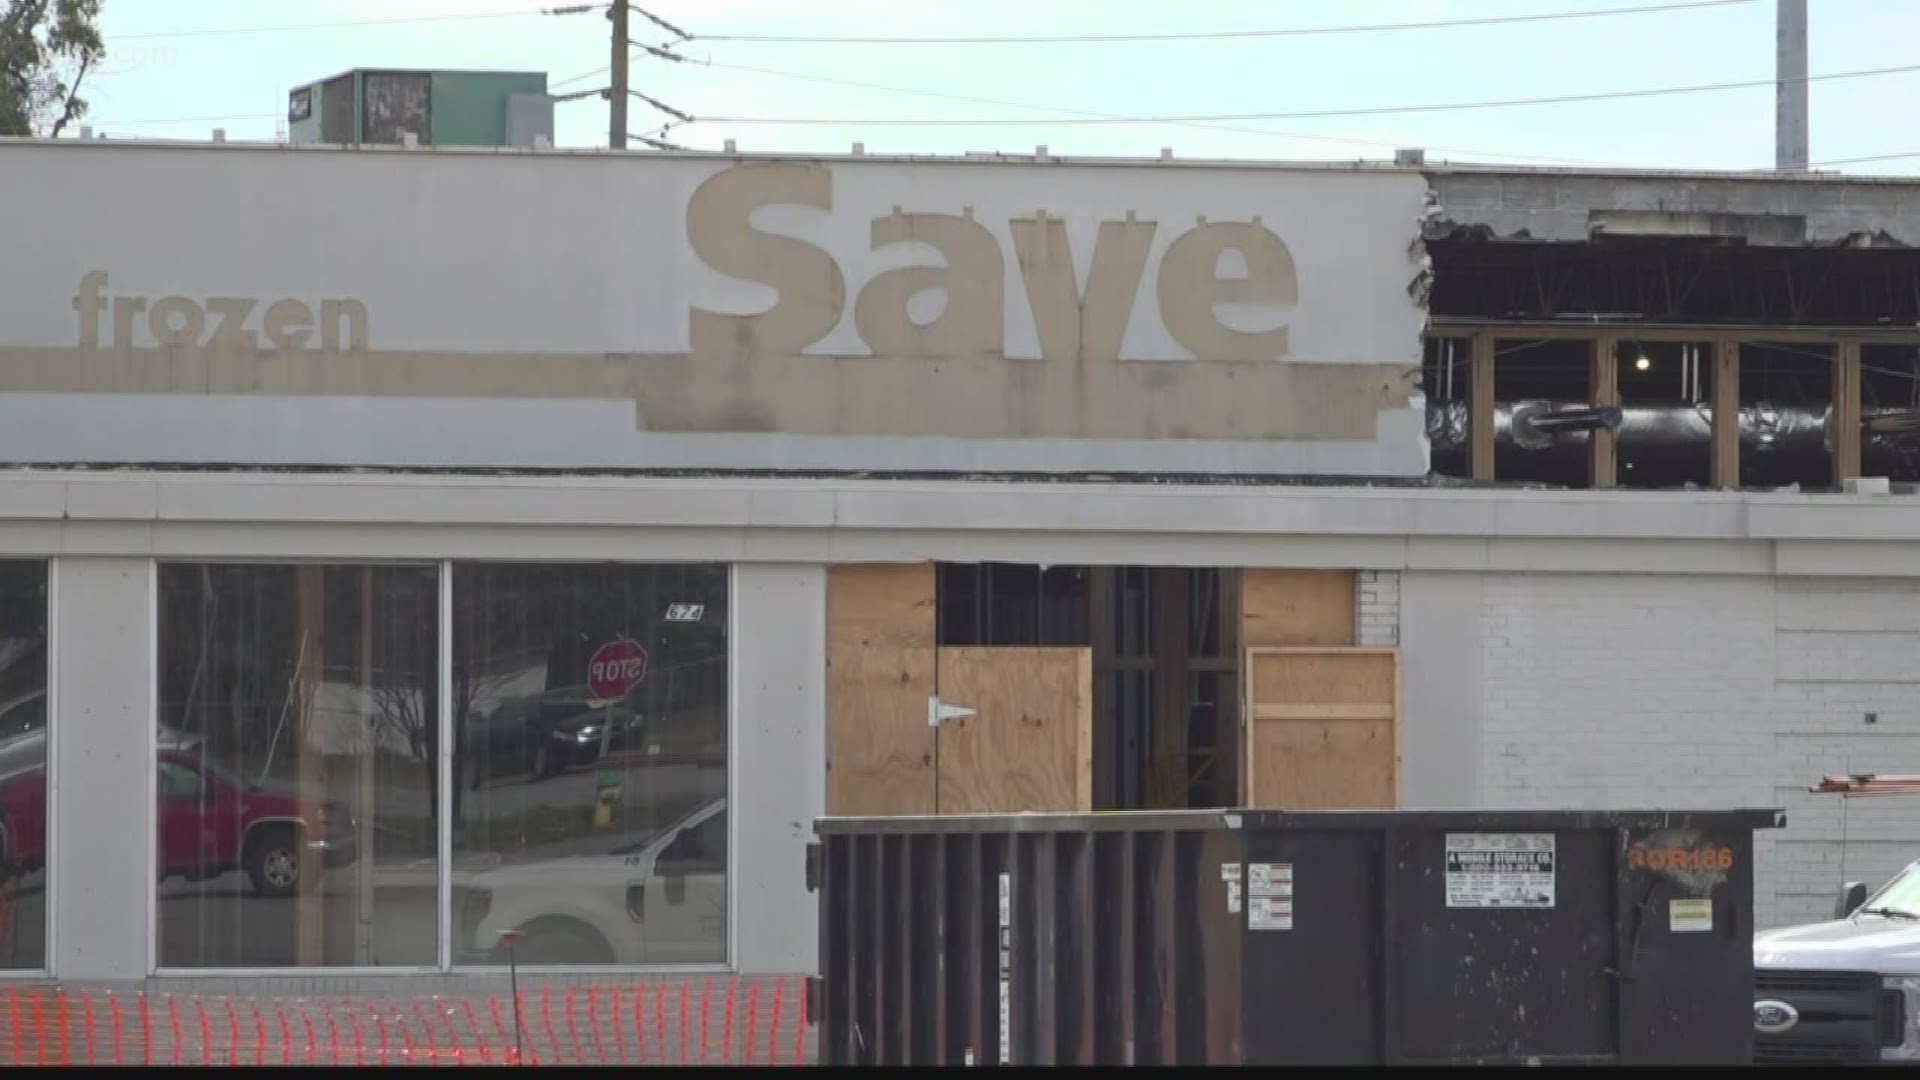 The old Sav-A-Lot grocery store will soon become the new Colonial Health care facility.